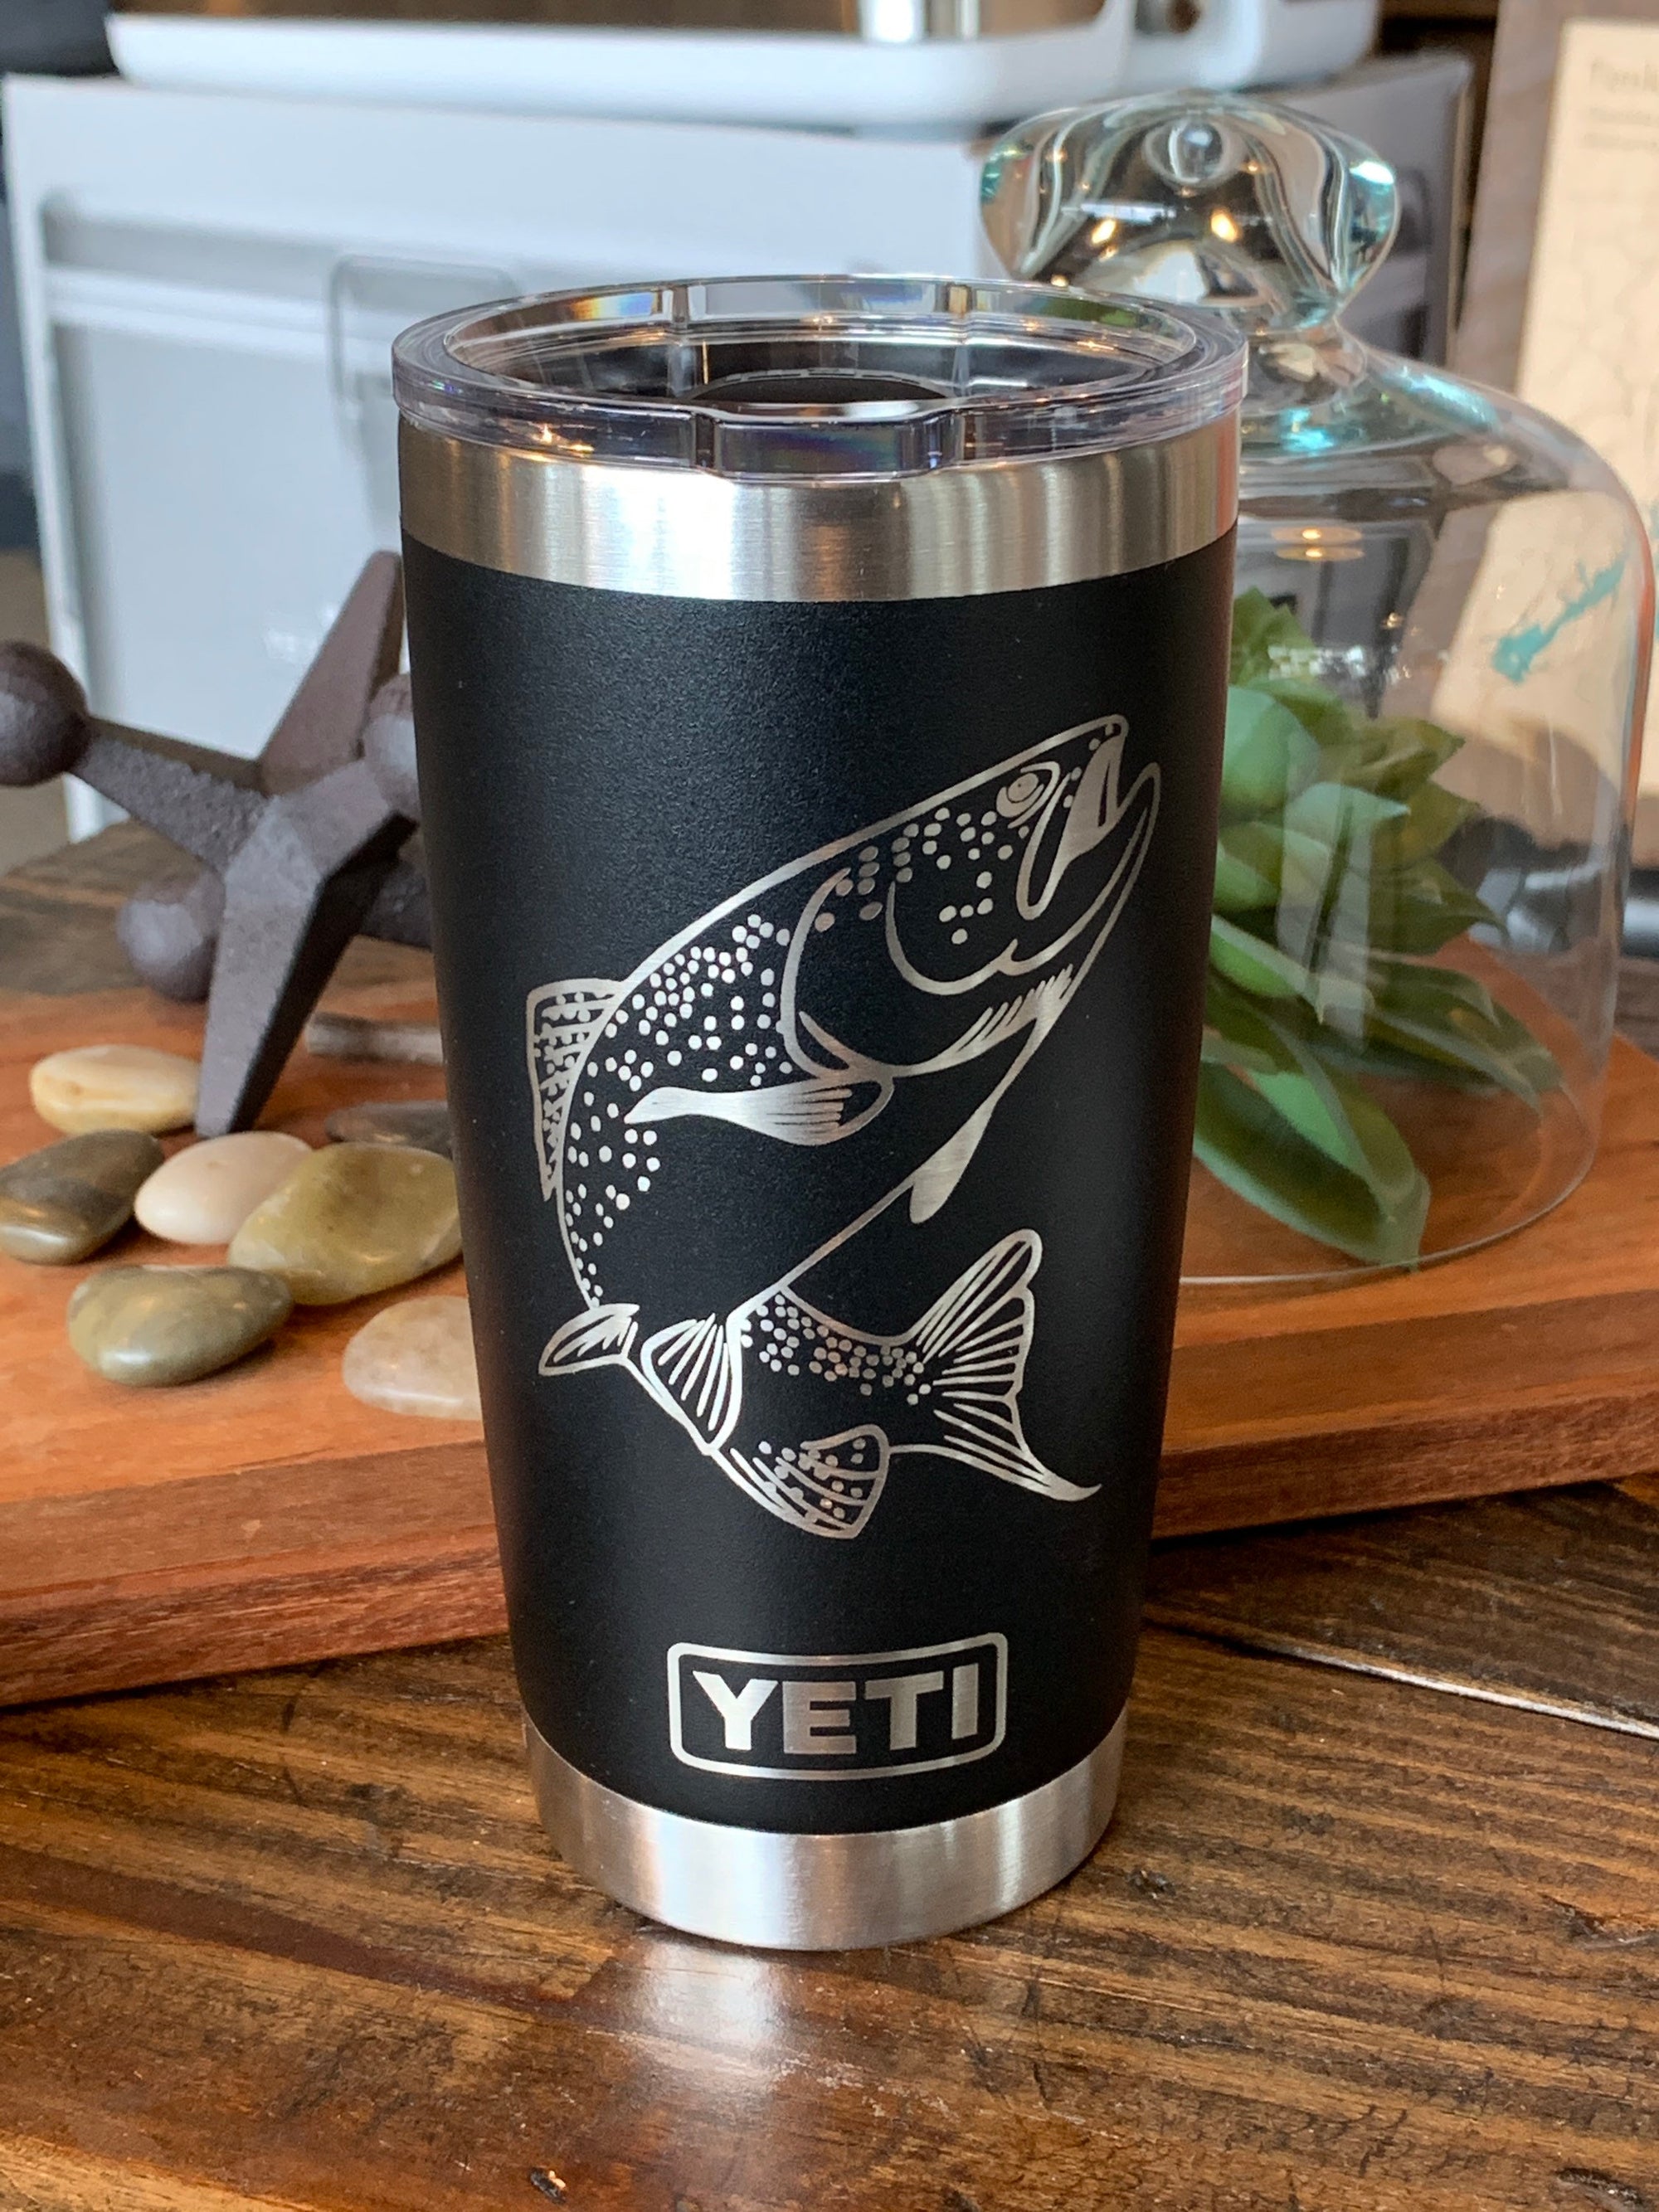  YETI - Personalized Fish Reaper, Fishing Gift, Angler, Laser  Engraved Tumblers and Bottles, Multiple Sizes and Colors Available :  Handmade Products